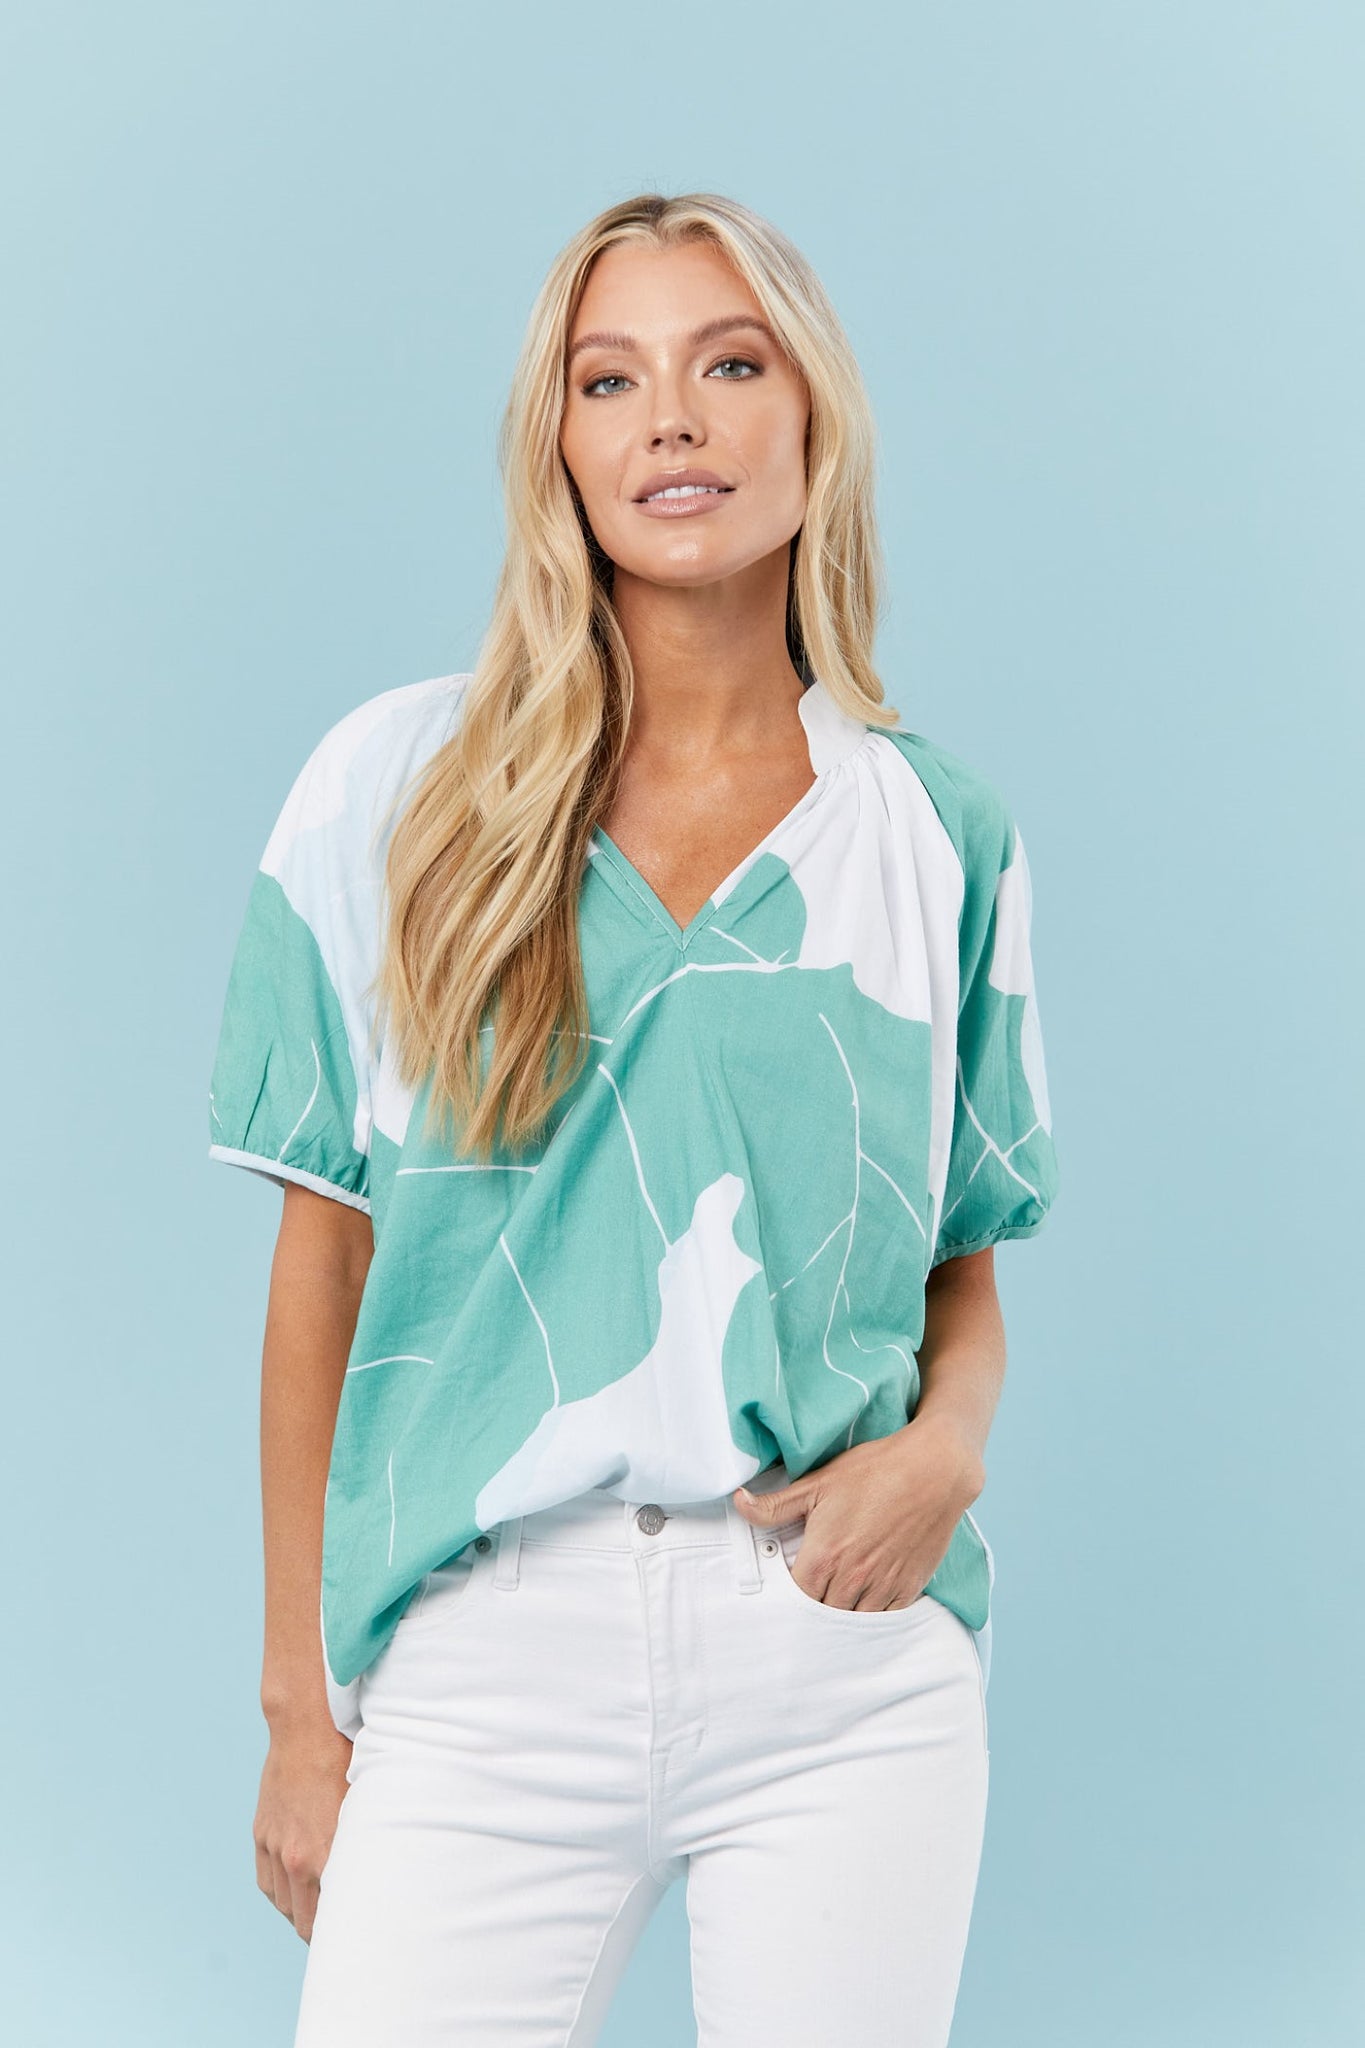 Dana Blouse in Teal Palms